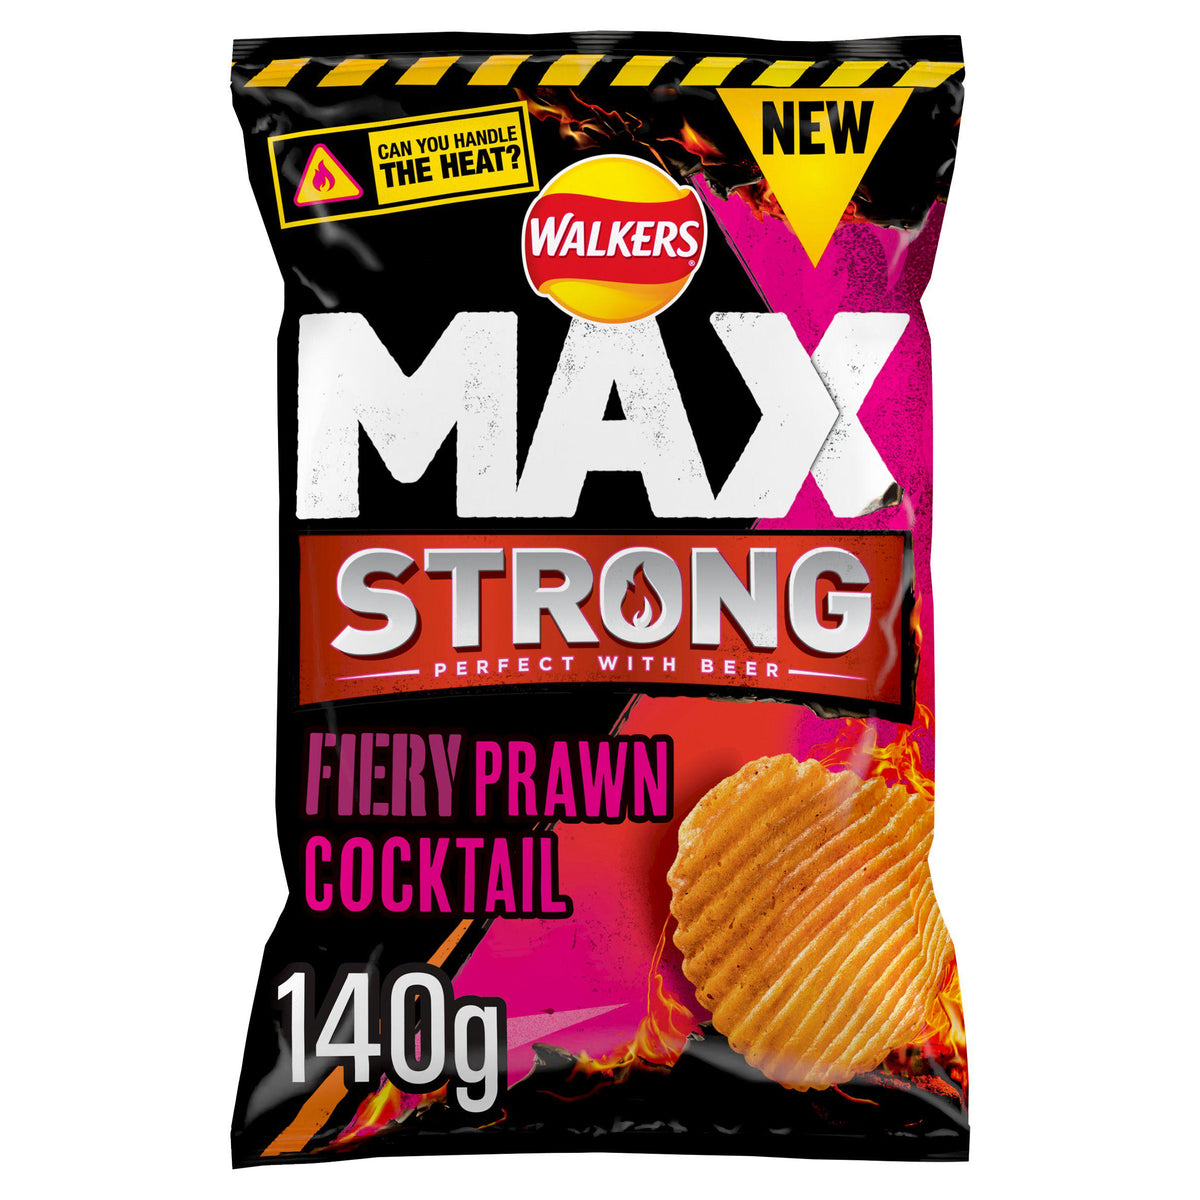 Walkers Max Strong Fiery Prawn Cocktail